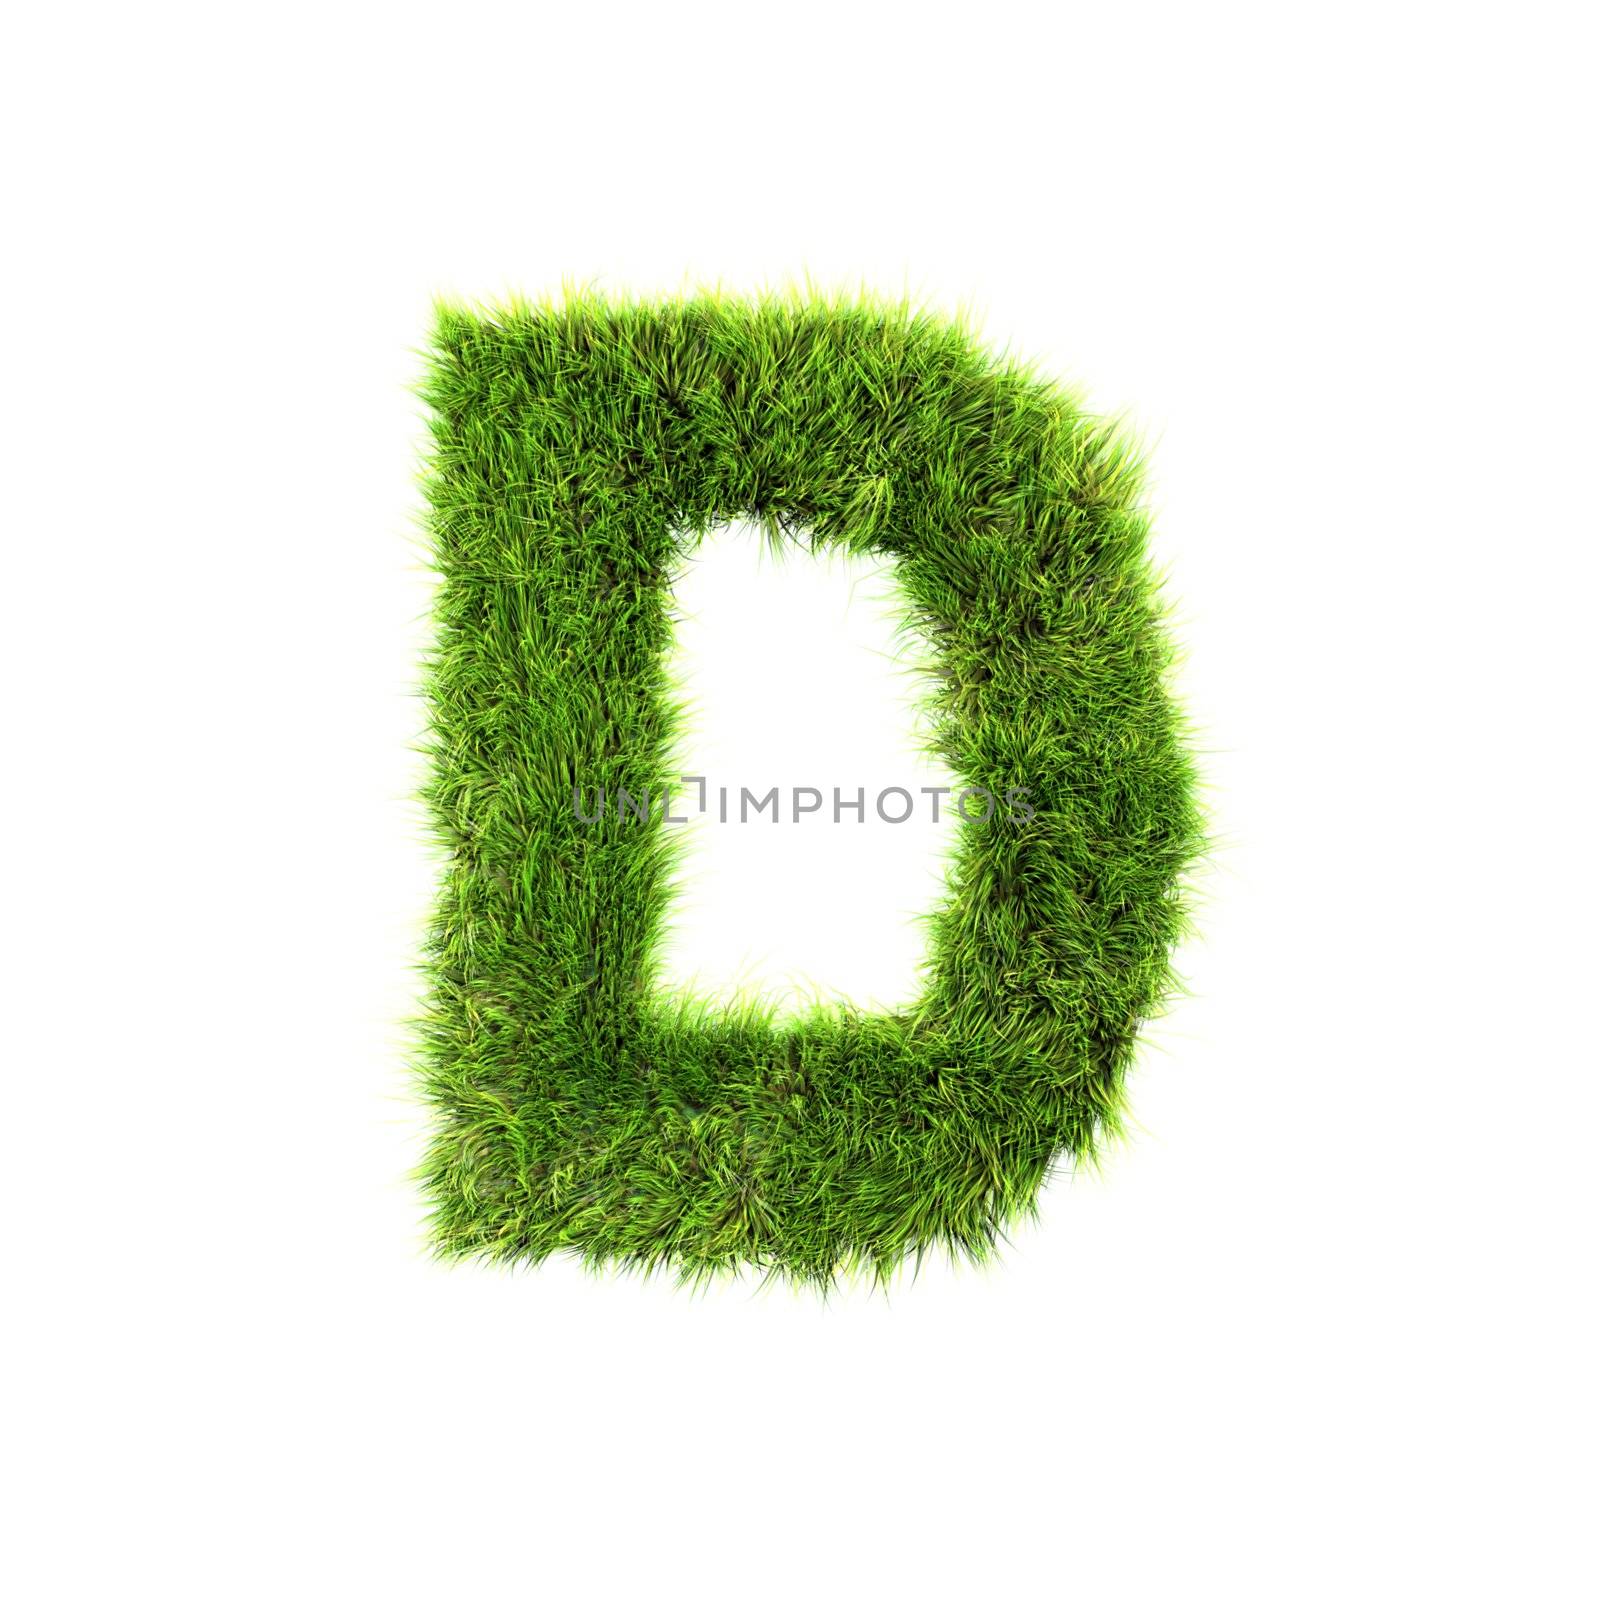 3d grass letter isolated on white background - D by chrisroll